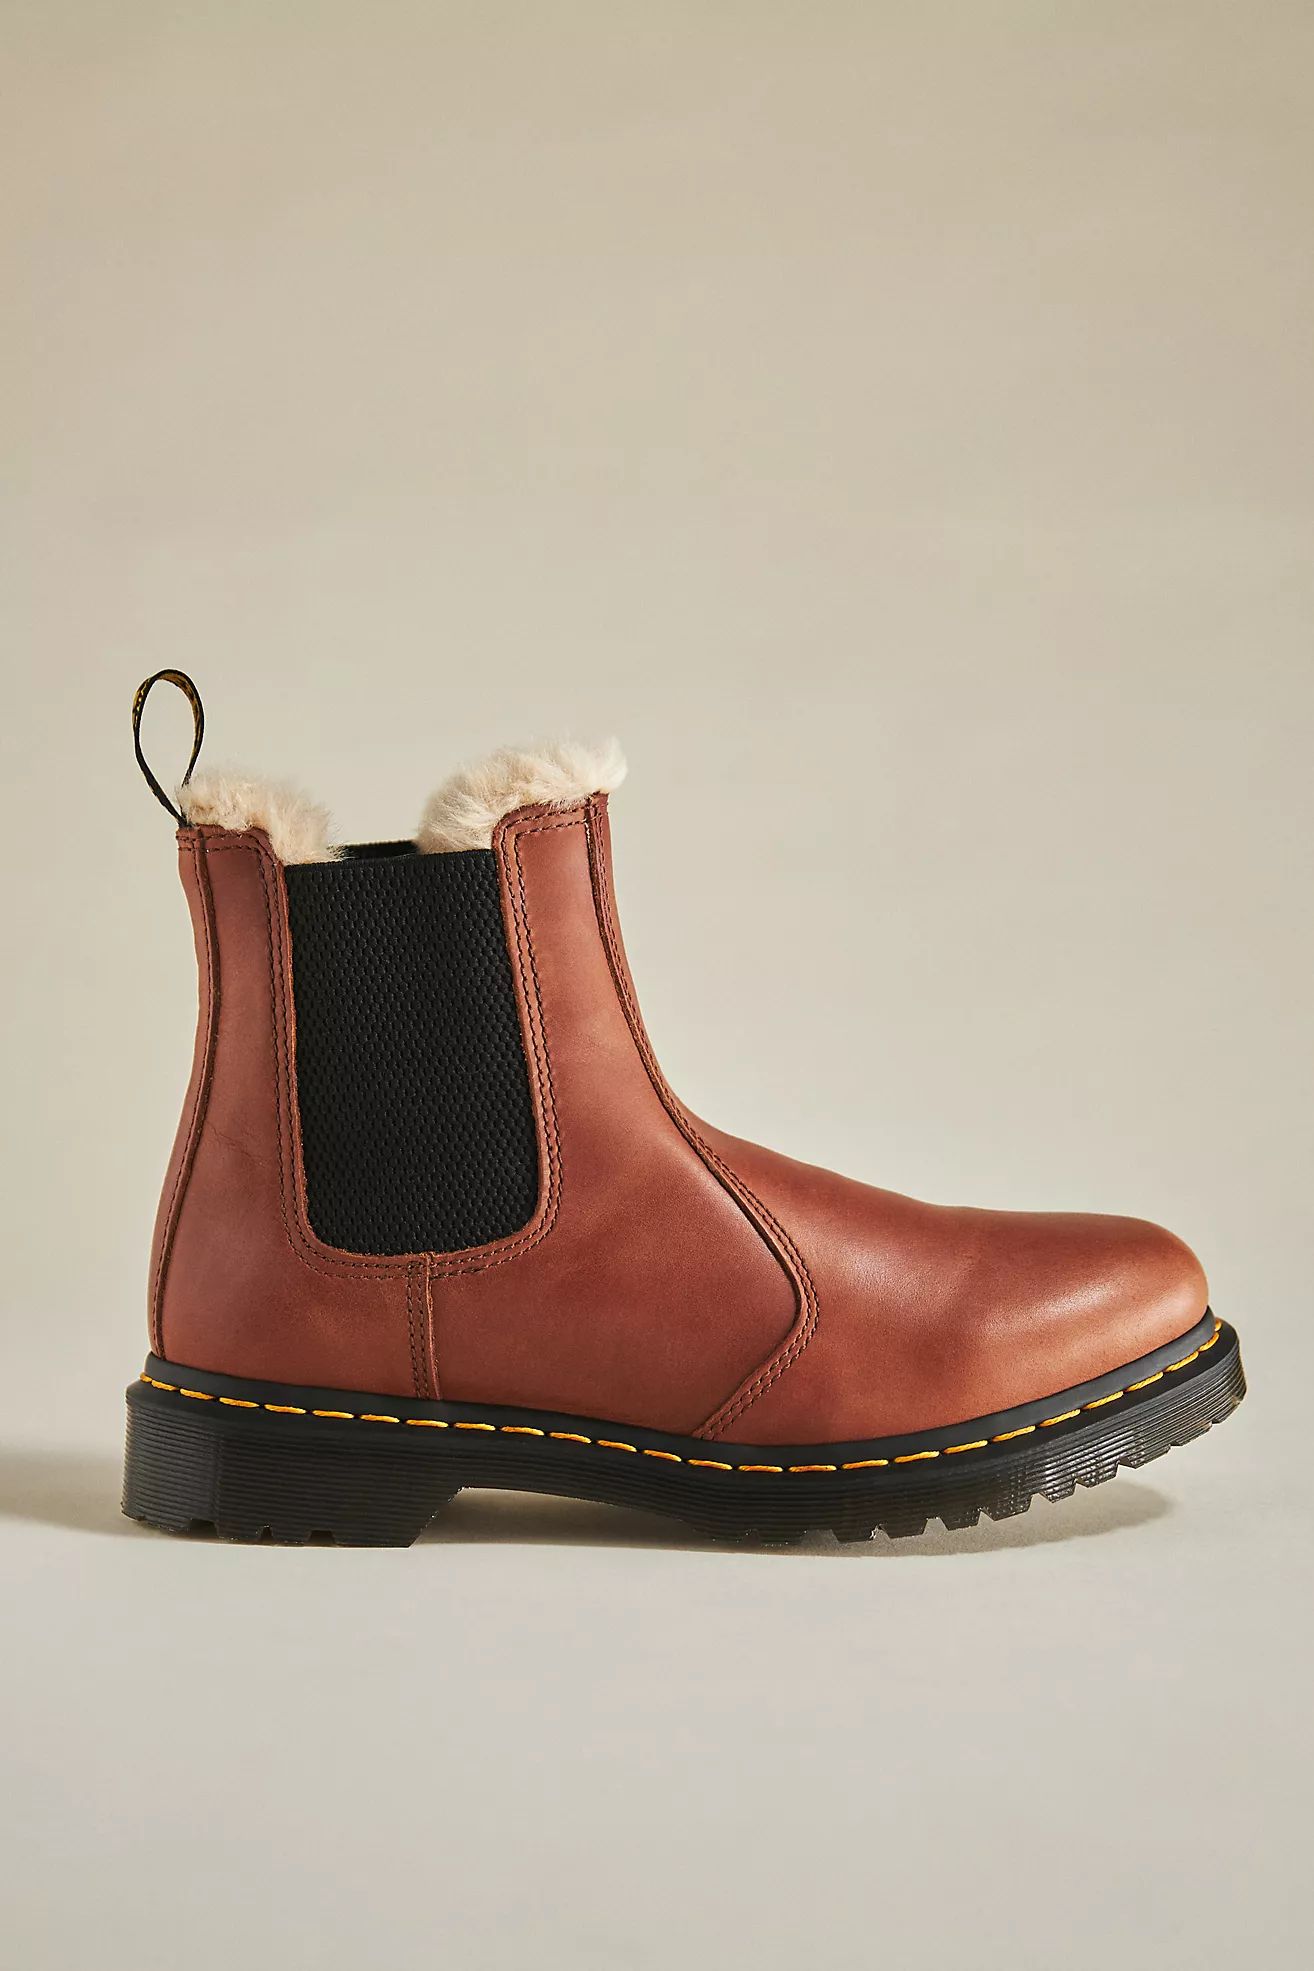 Dr. Martens 2976 Leonore Chelsea Boots | Anthropologie (US)